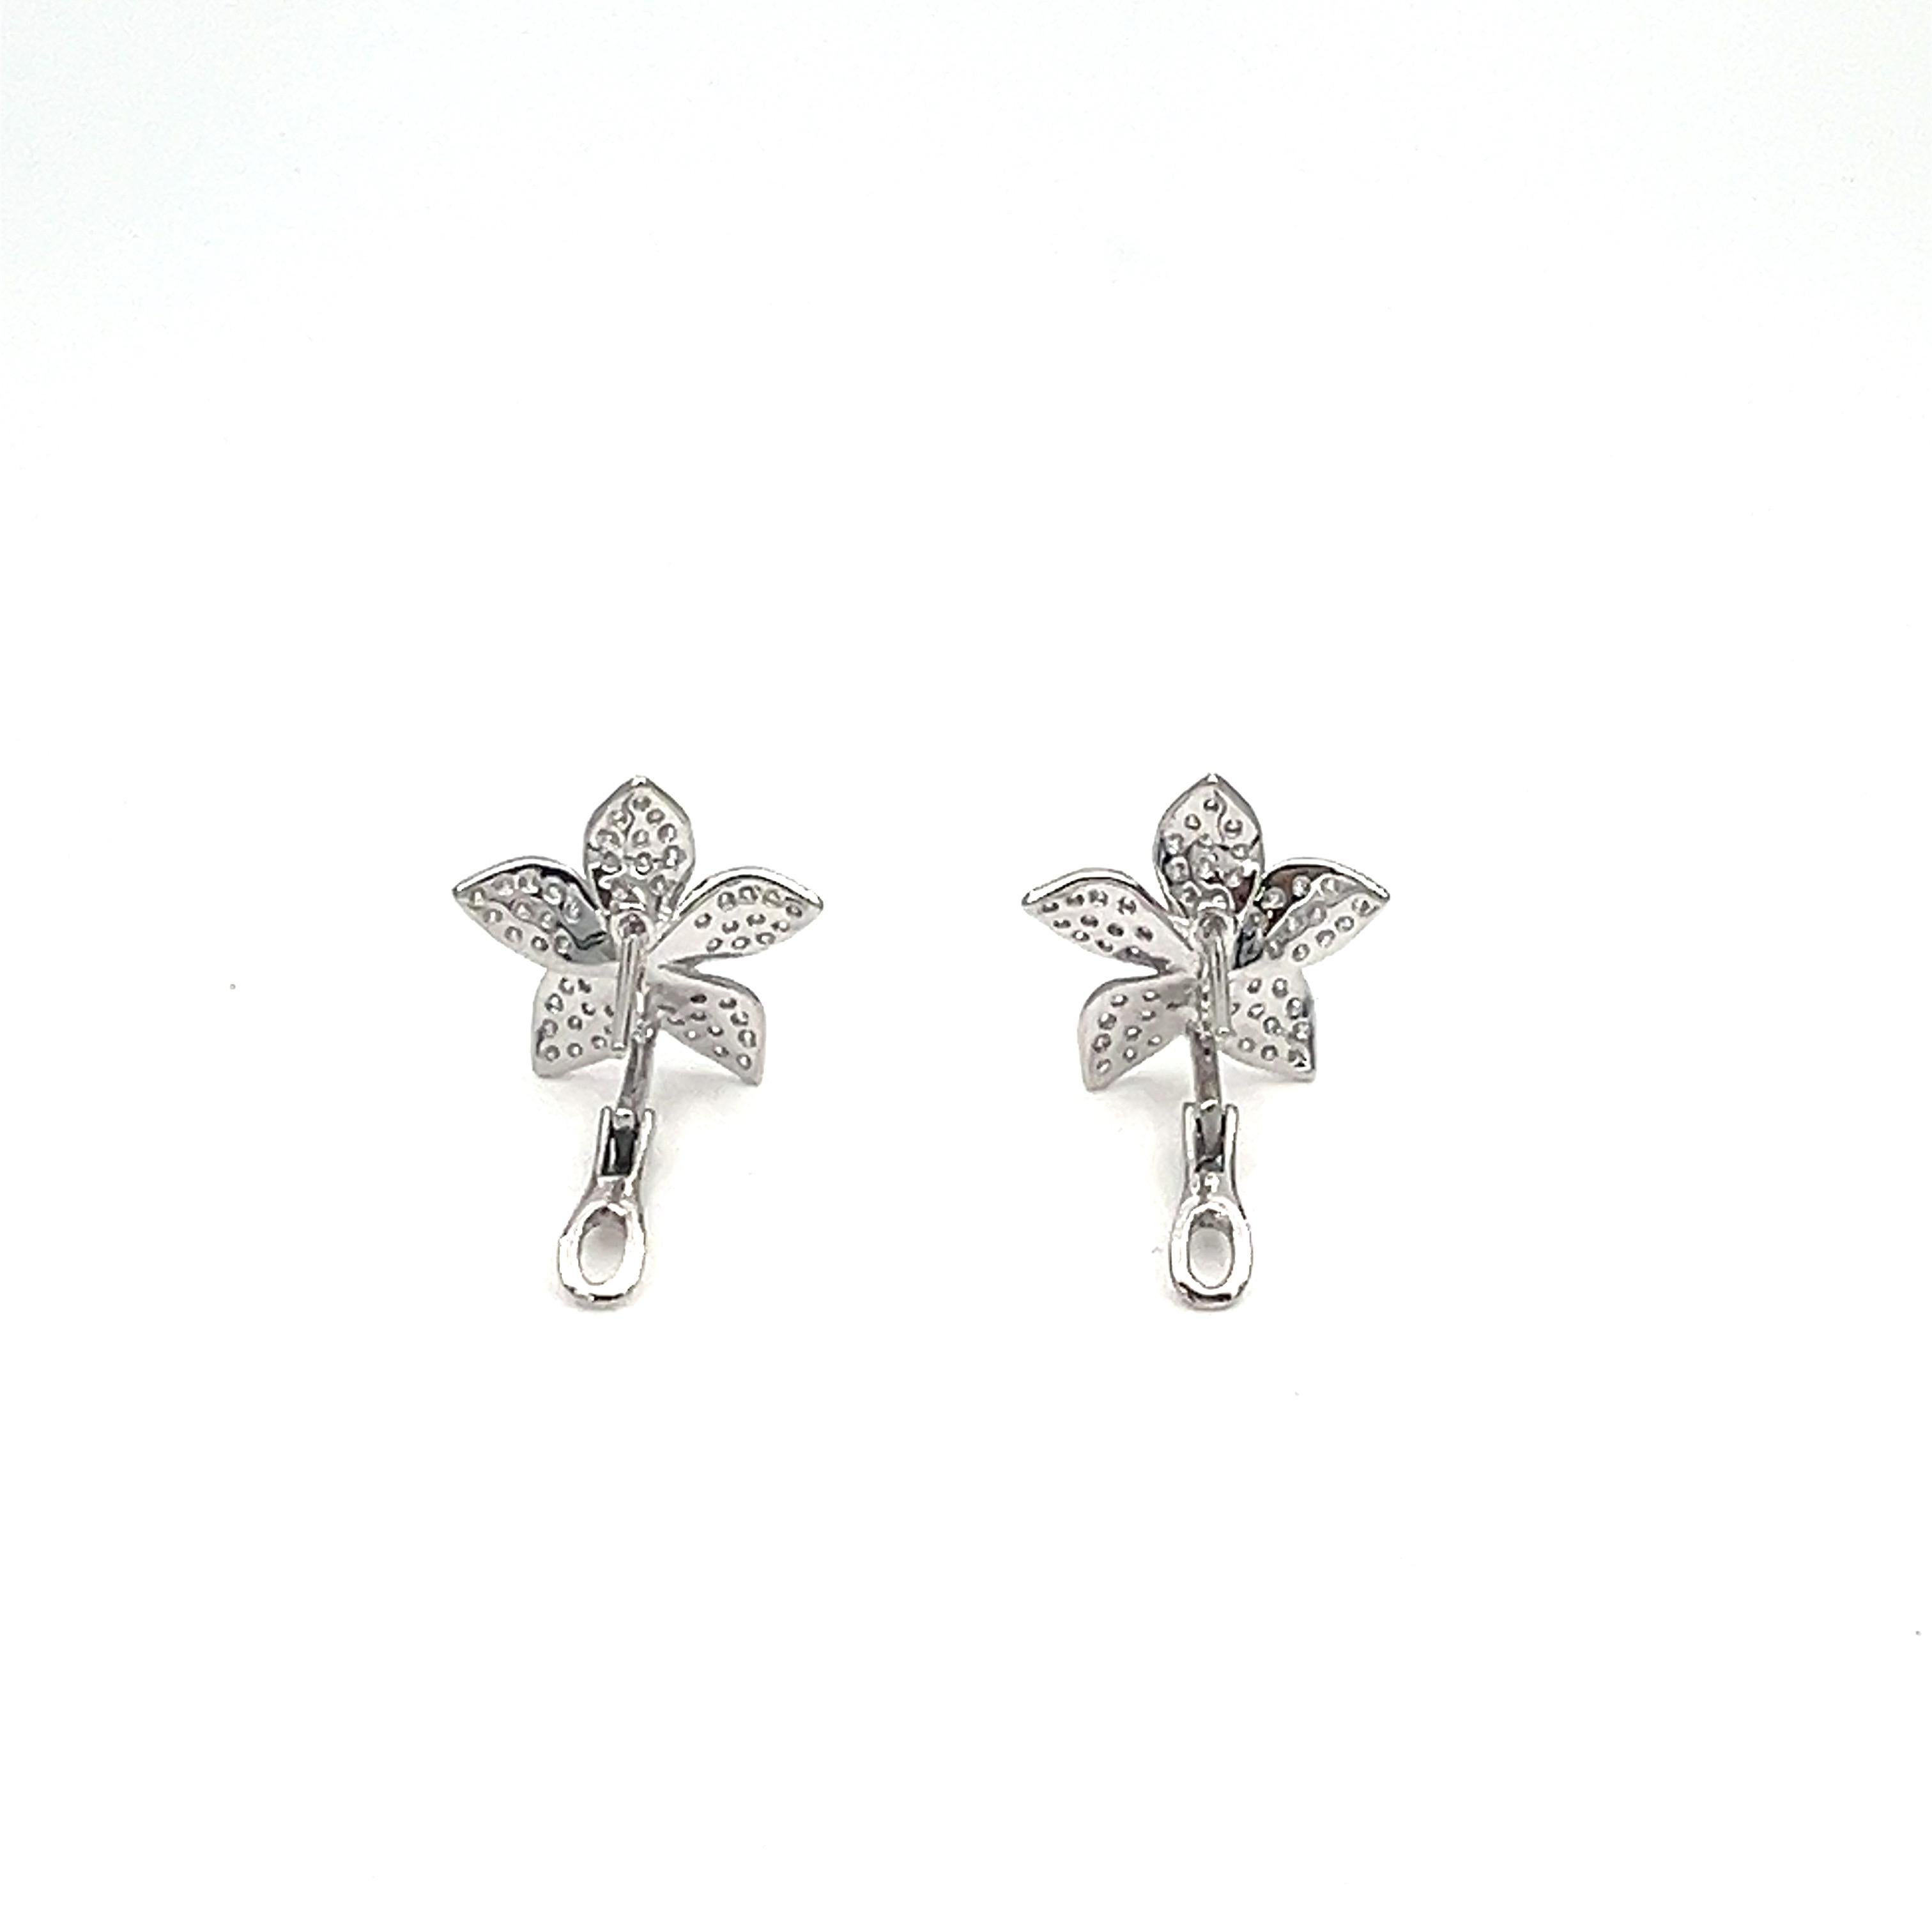 Round Cut 1.48 ct Flowered Diamond Earrings For Sale